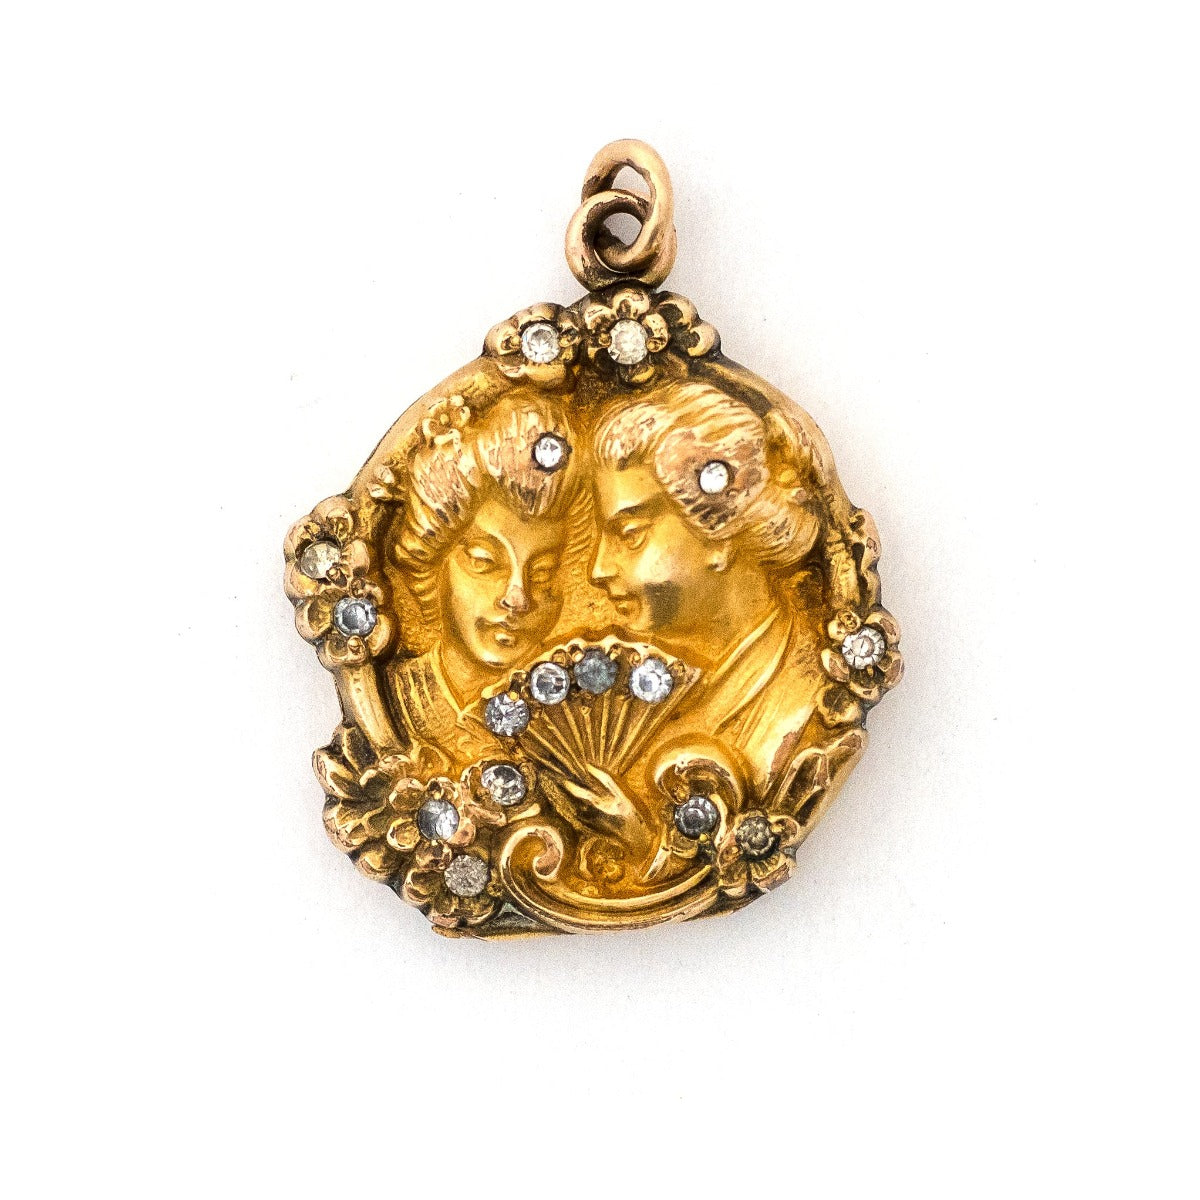 Ladies with Fan Antique Locket, front view, antique gold fill locket with paste stones, women with fan